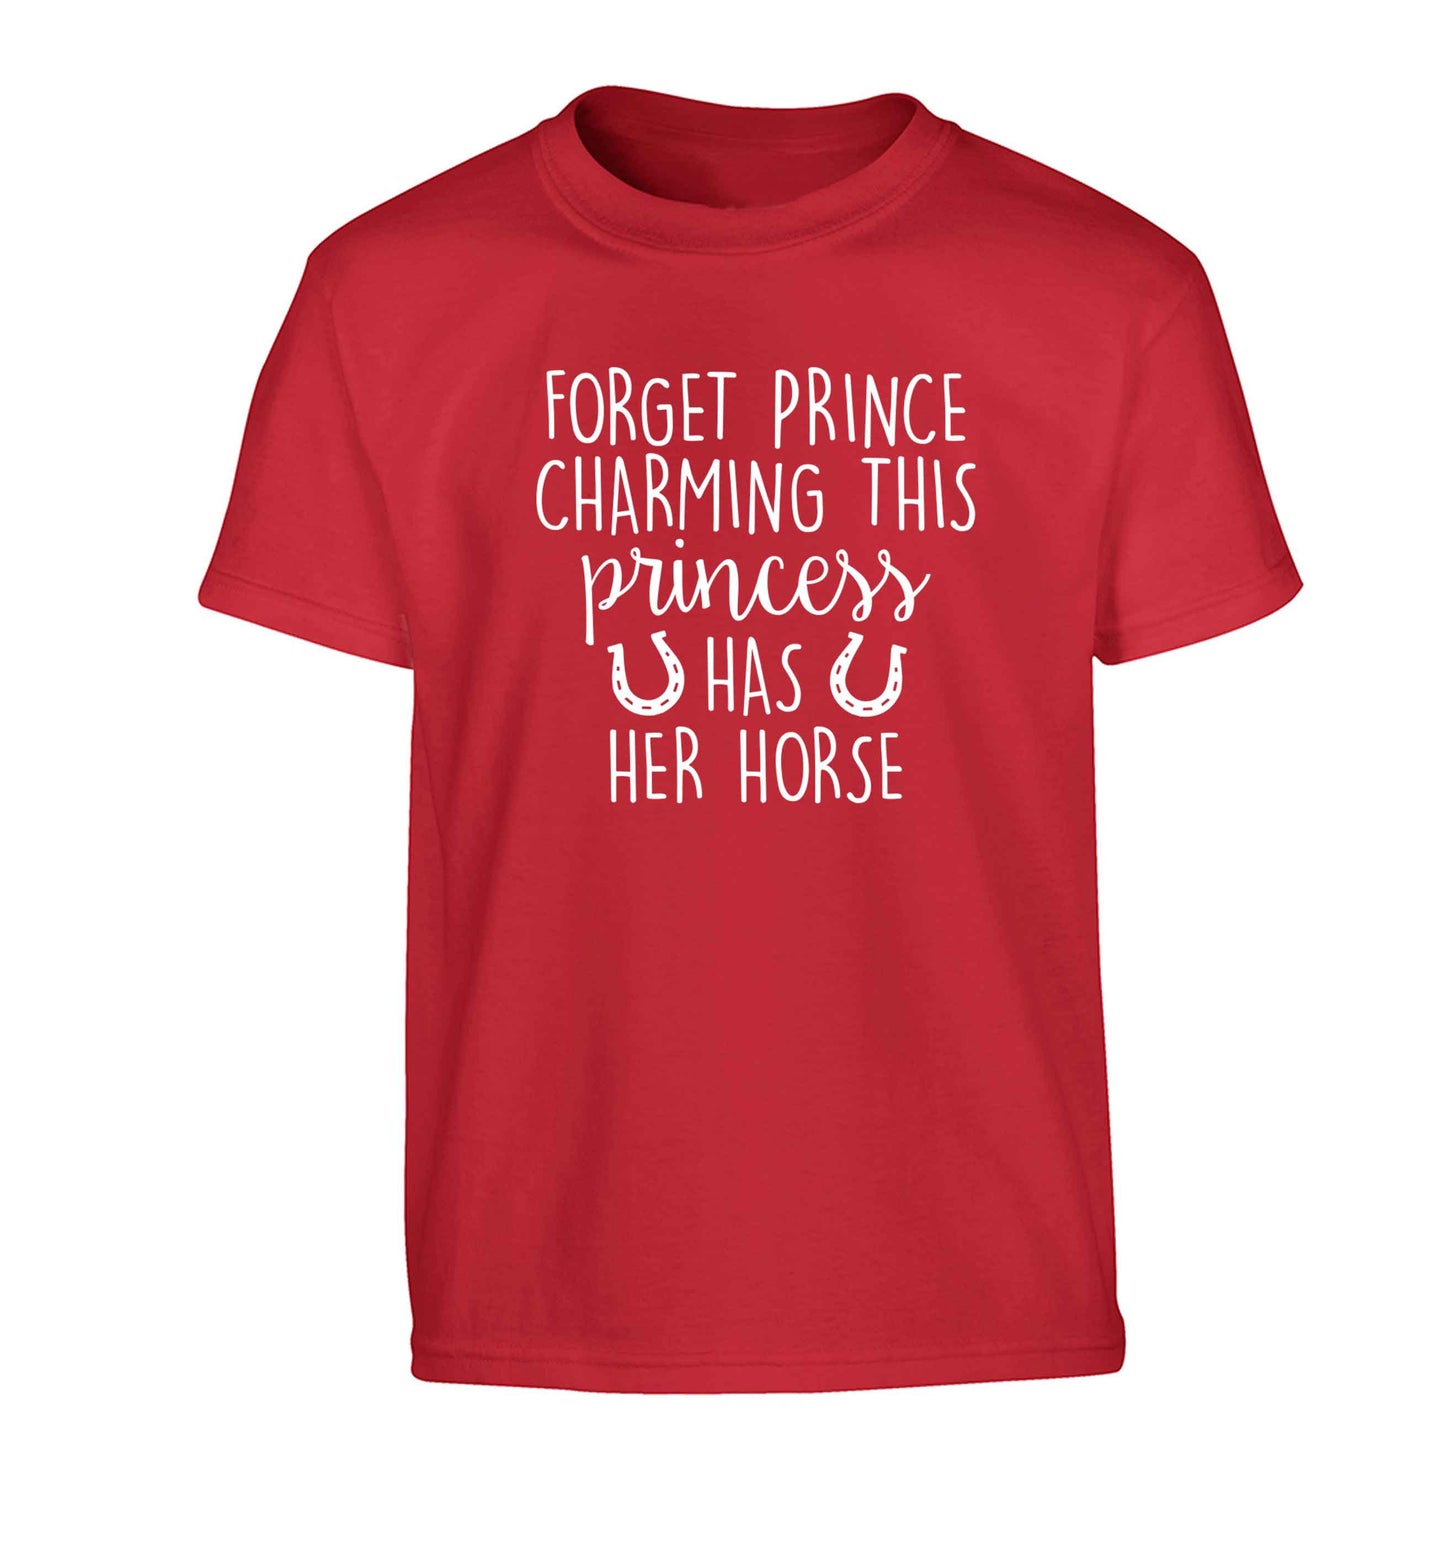 Forget prince charming this princess has her horse Children's red Tshirt 12-13 Years